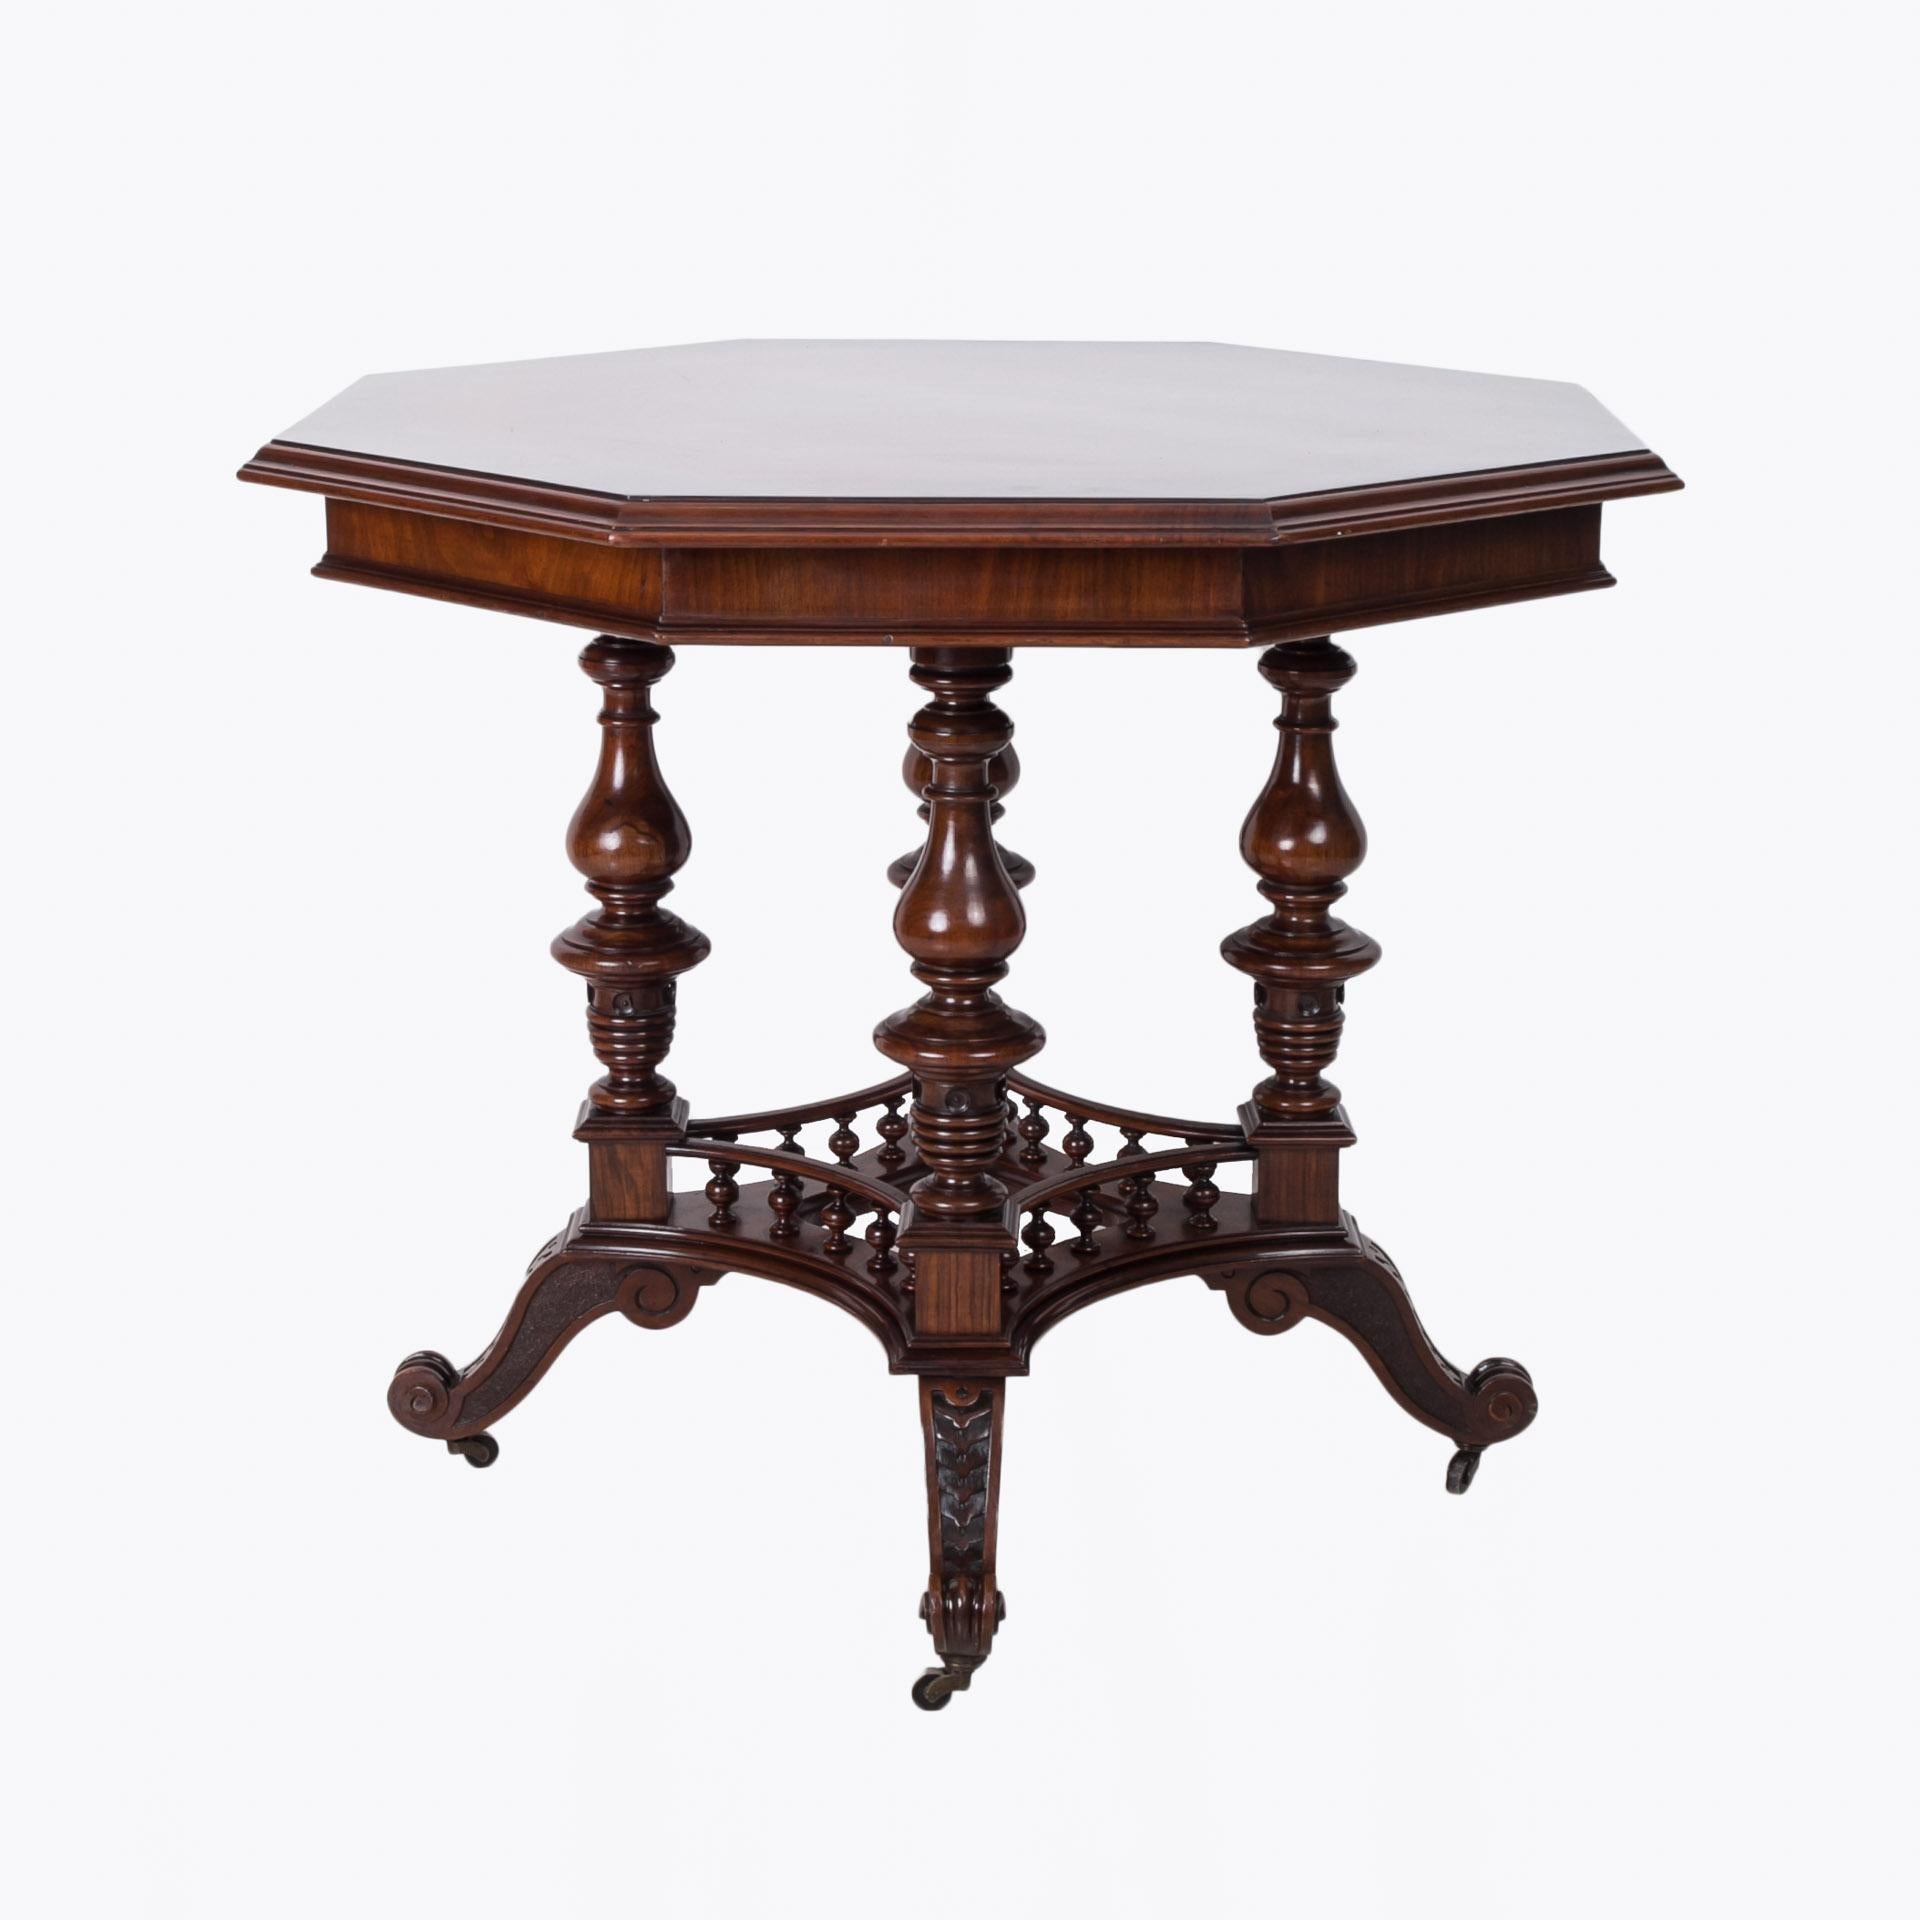 This beautiful table comes from Poland from second half of the 19th century. The legs are made of solid walnut. The top is made of coniferous wood veneered with walnut. Surface was finished with shellac polish, applied by hand with a tampon, which,